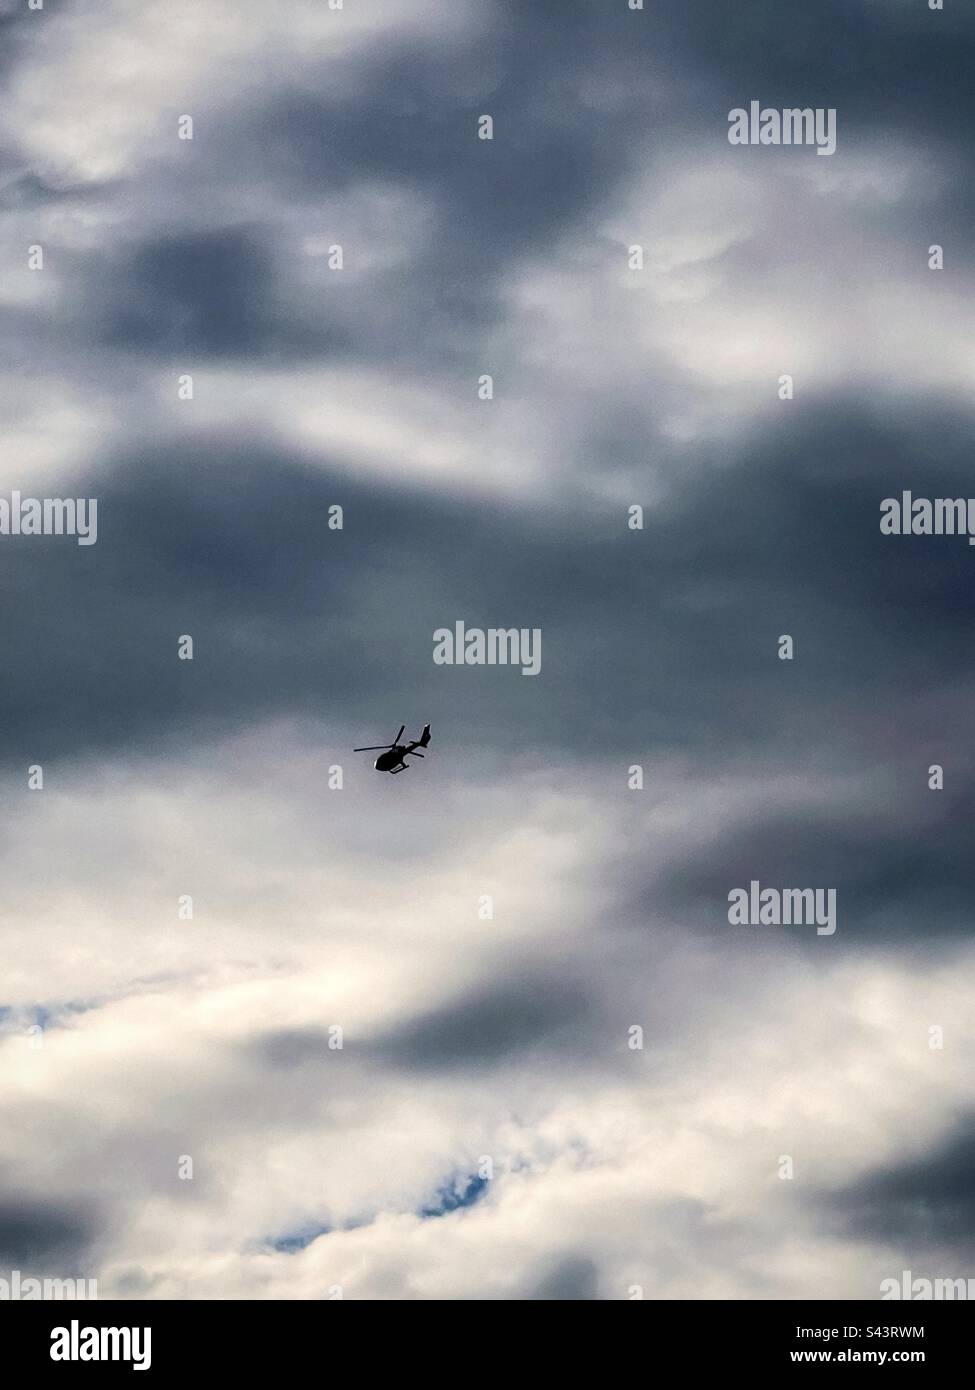 Low angle view of a helicopter flying against cloudy dramatic sky. Stock Photo